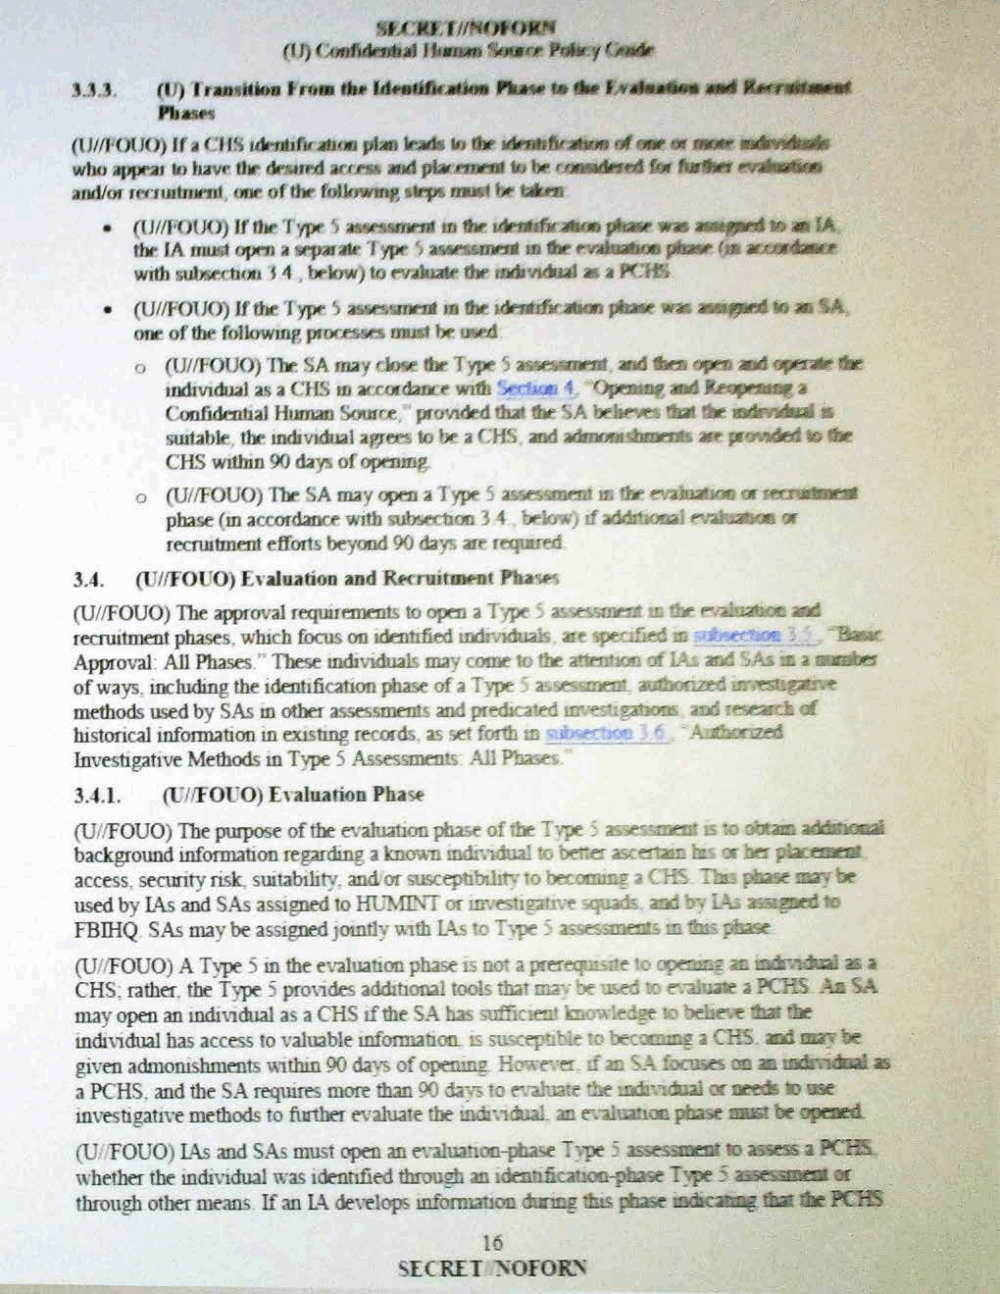 Page 28 from Confidential Human Source Policy Guide